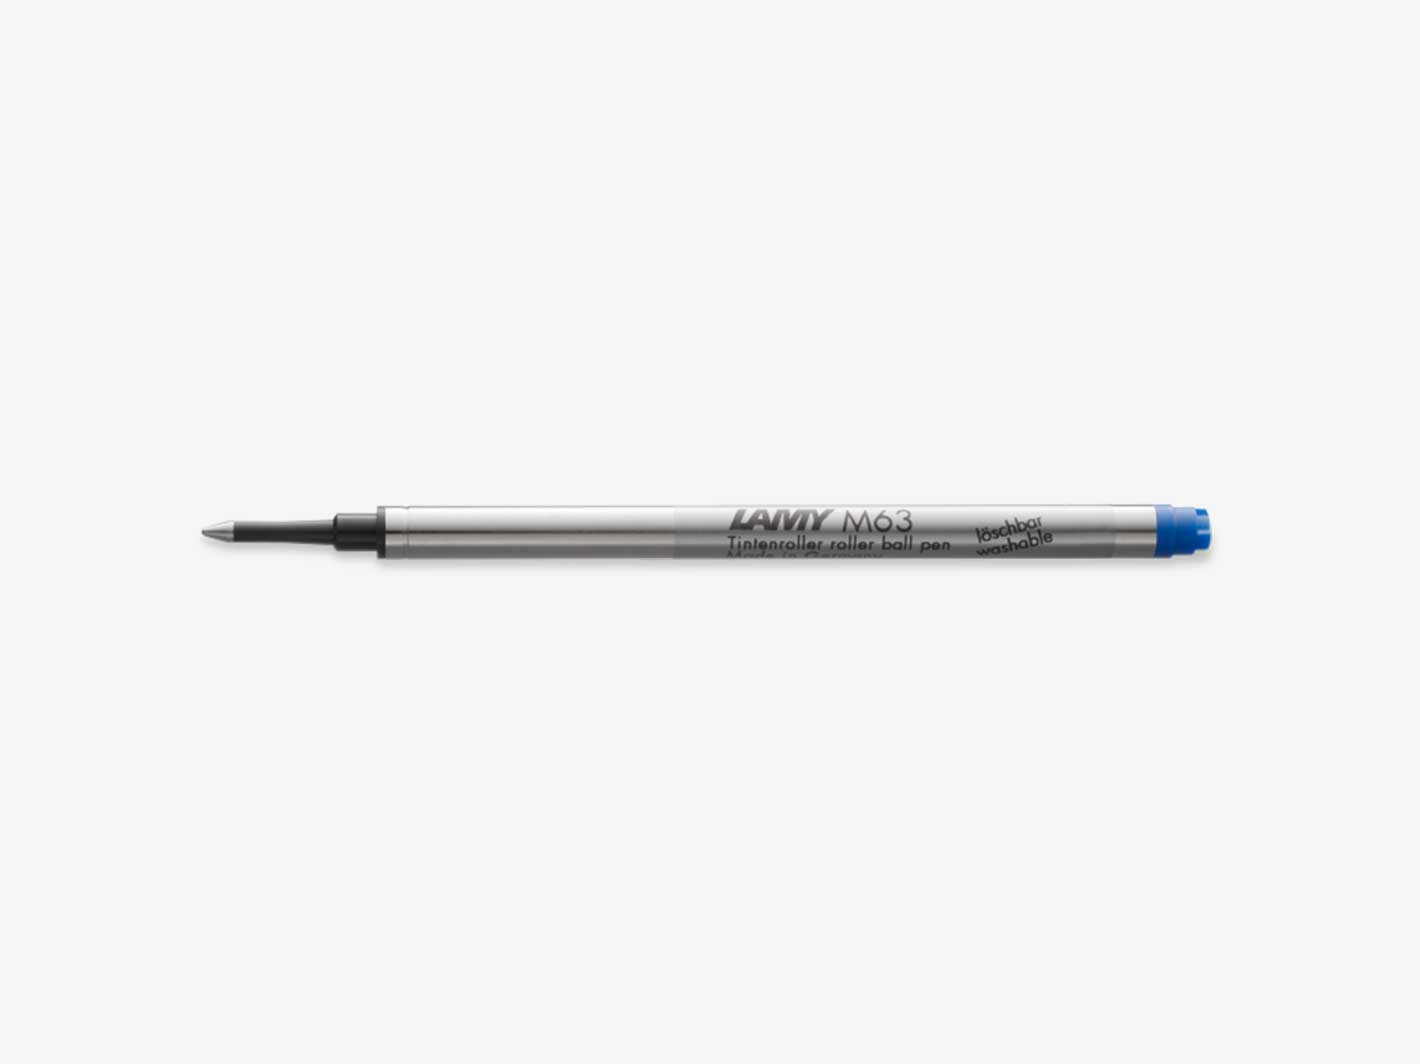 M63 Blue Refill for Aion Rollerball